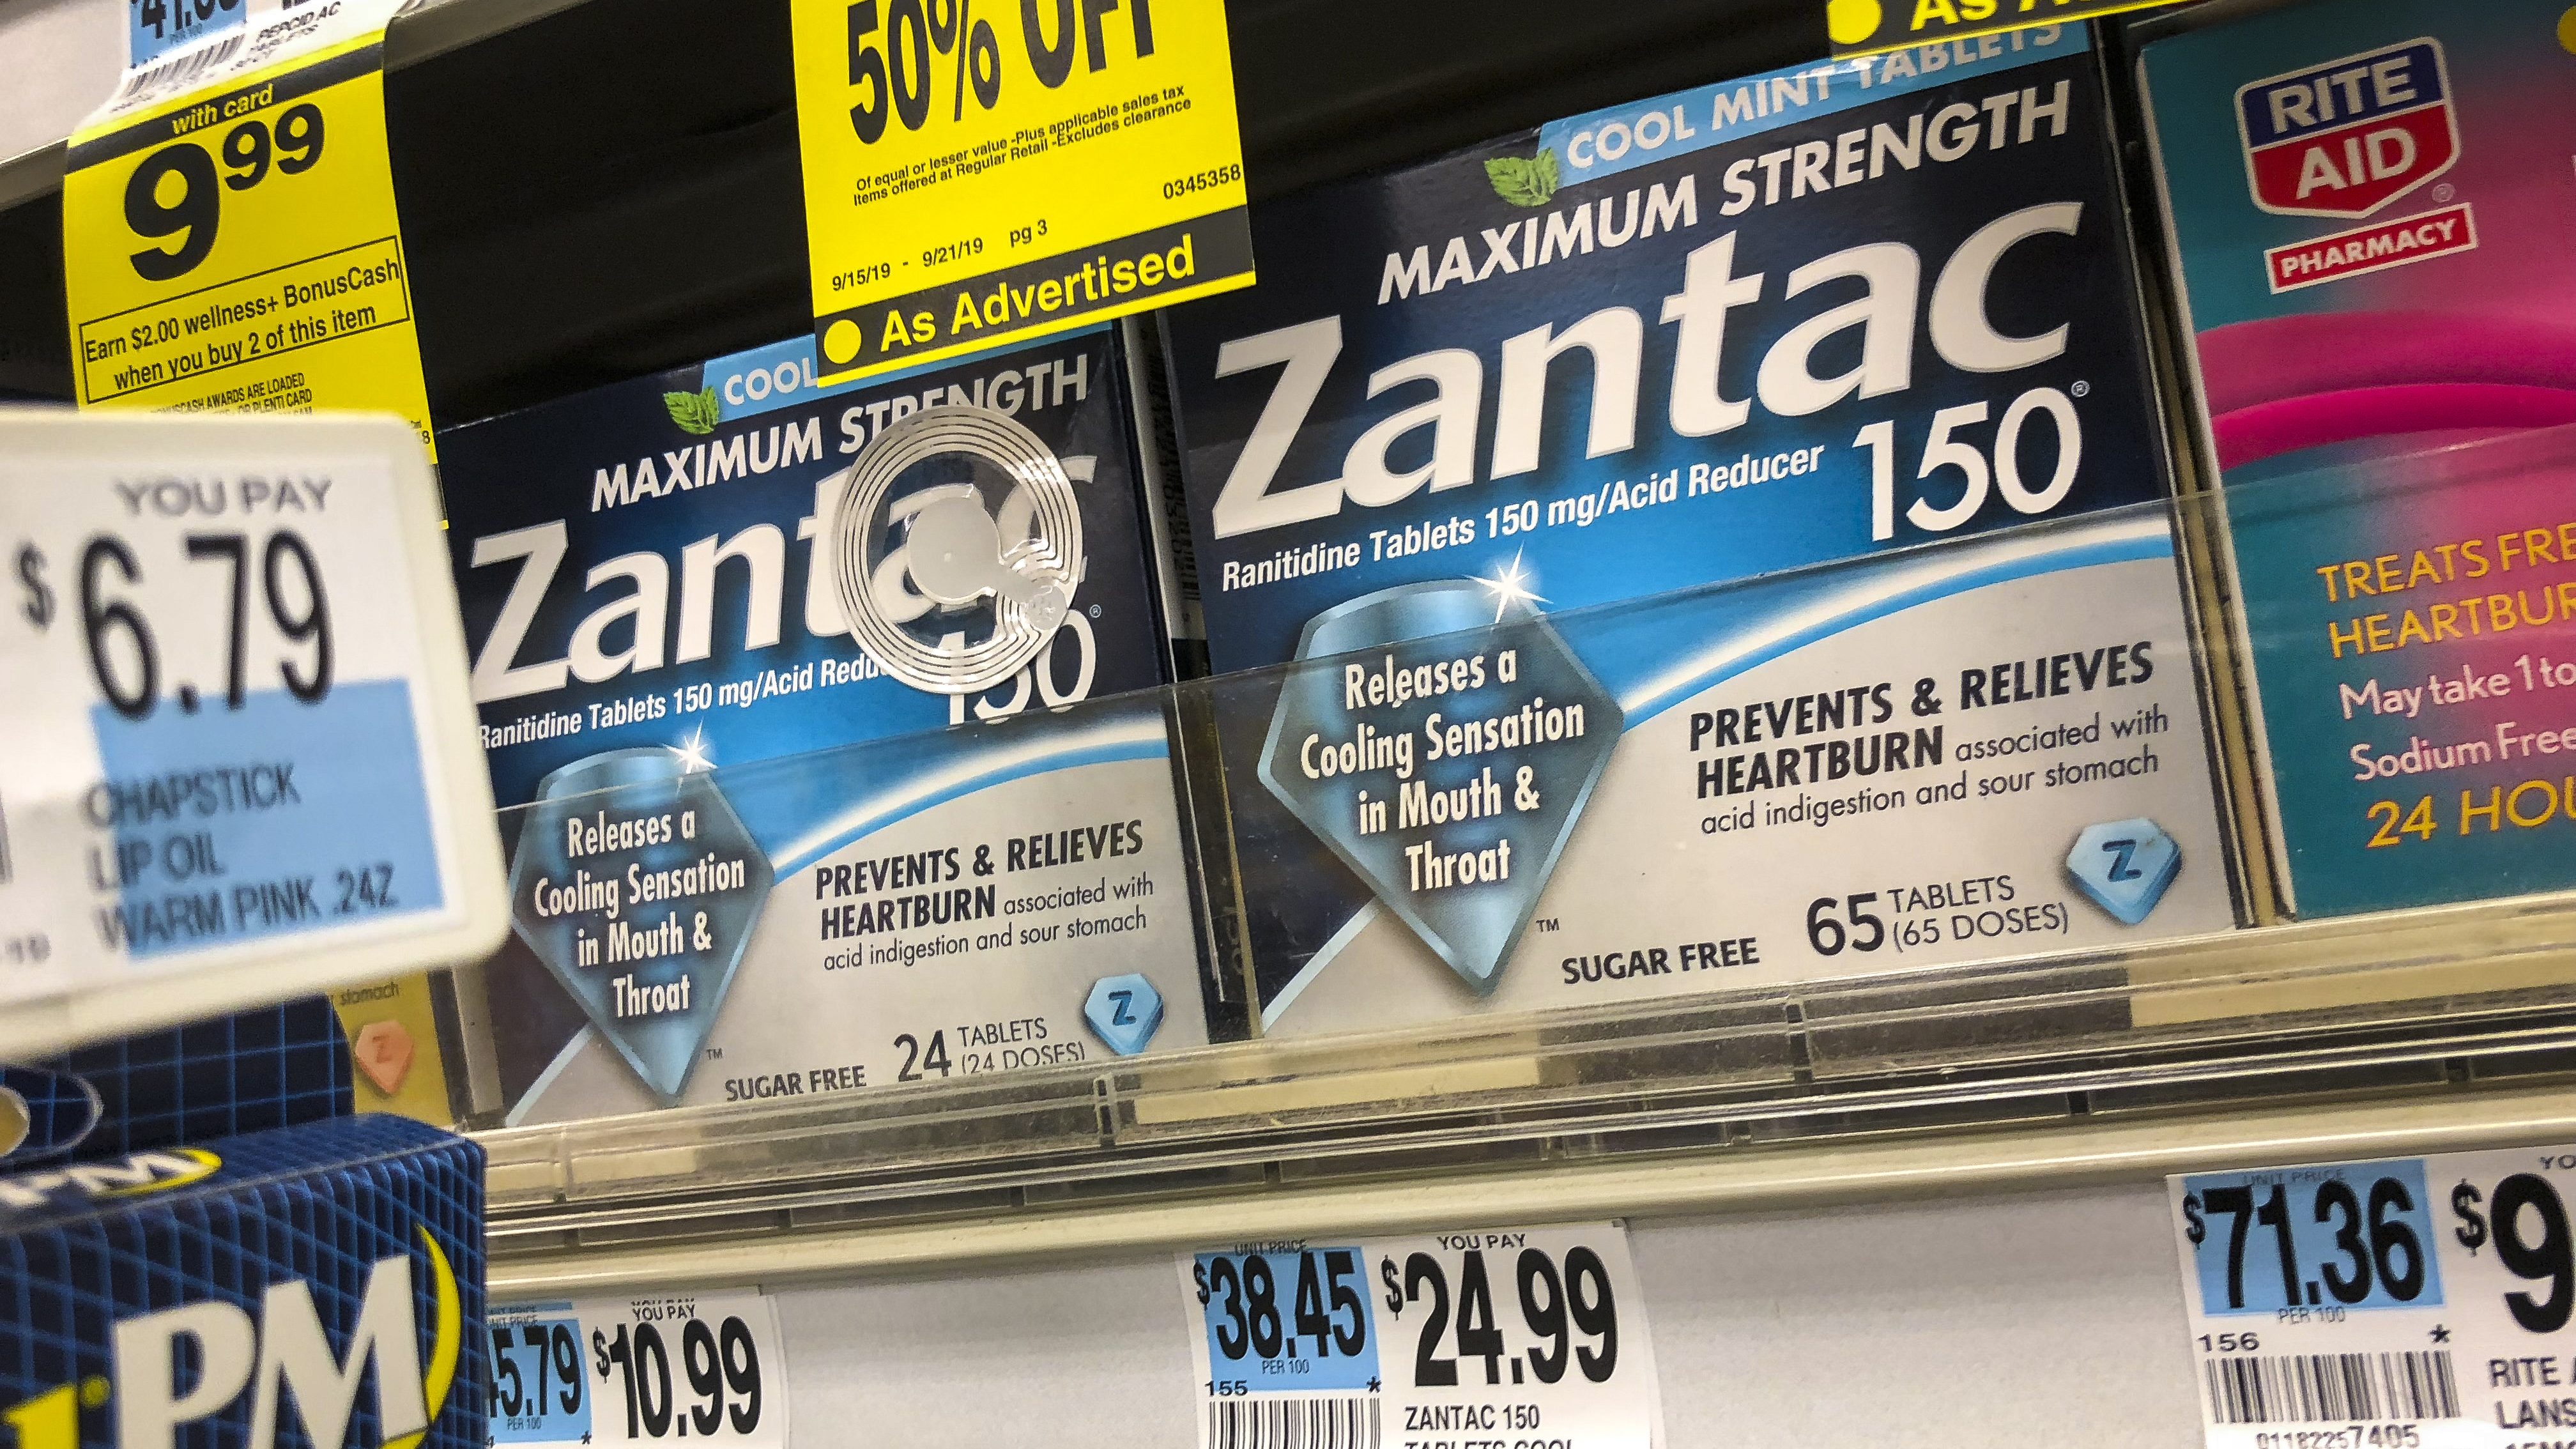 Shipments Of A Generic Zantac Halted After FDA Warns Of Low Level Probable Carcinogen In Zantac And Its Generic Version